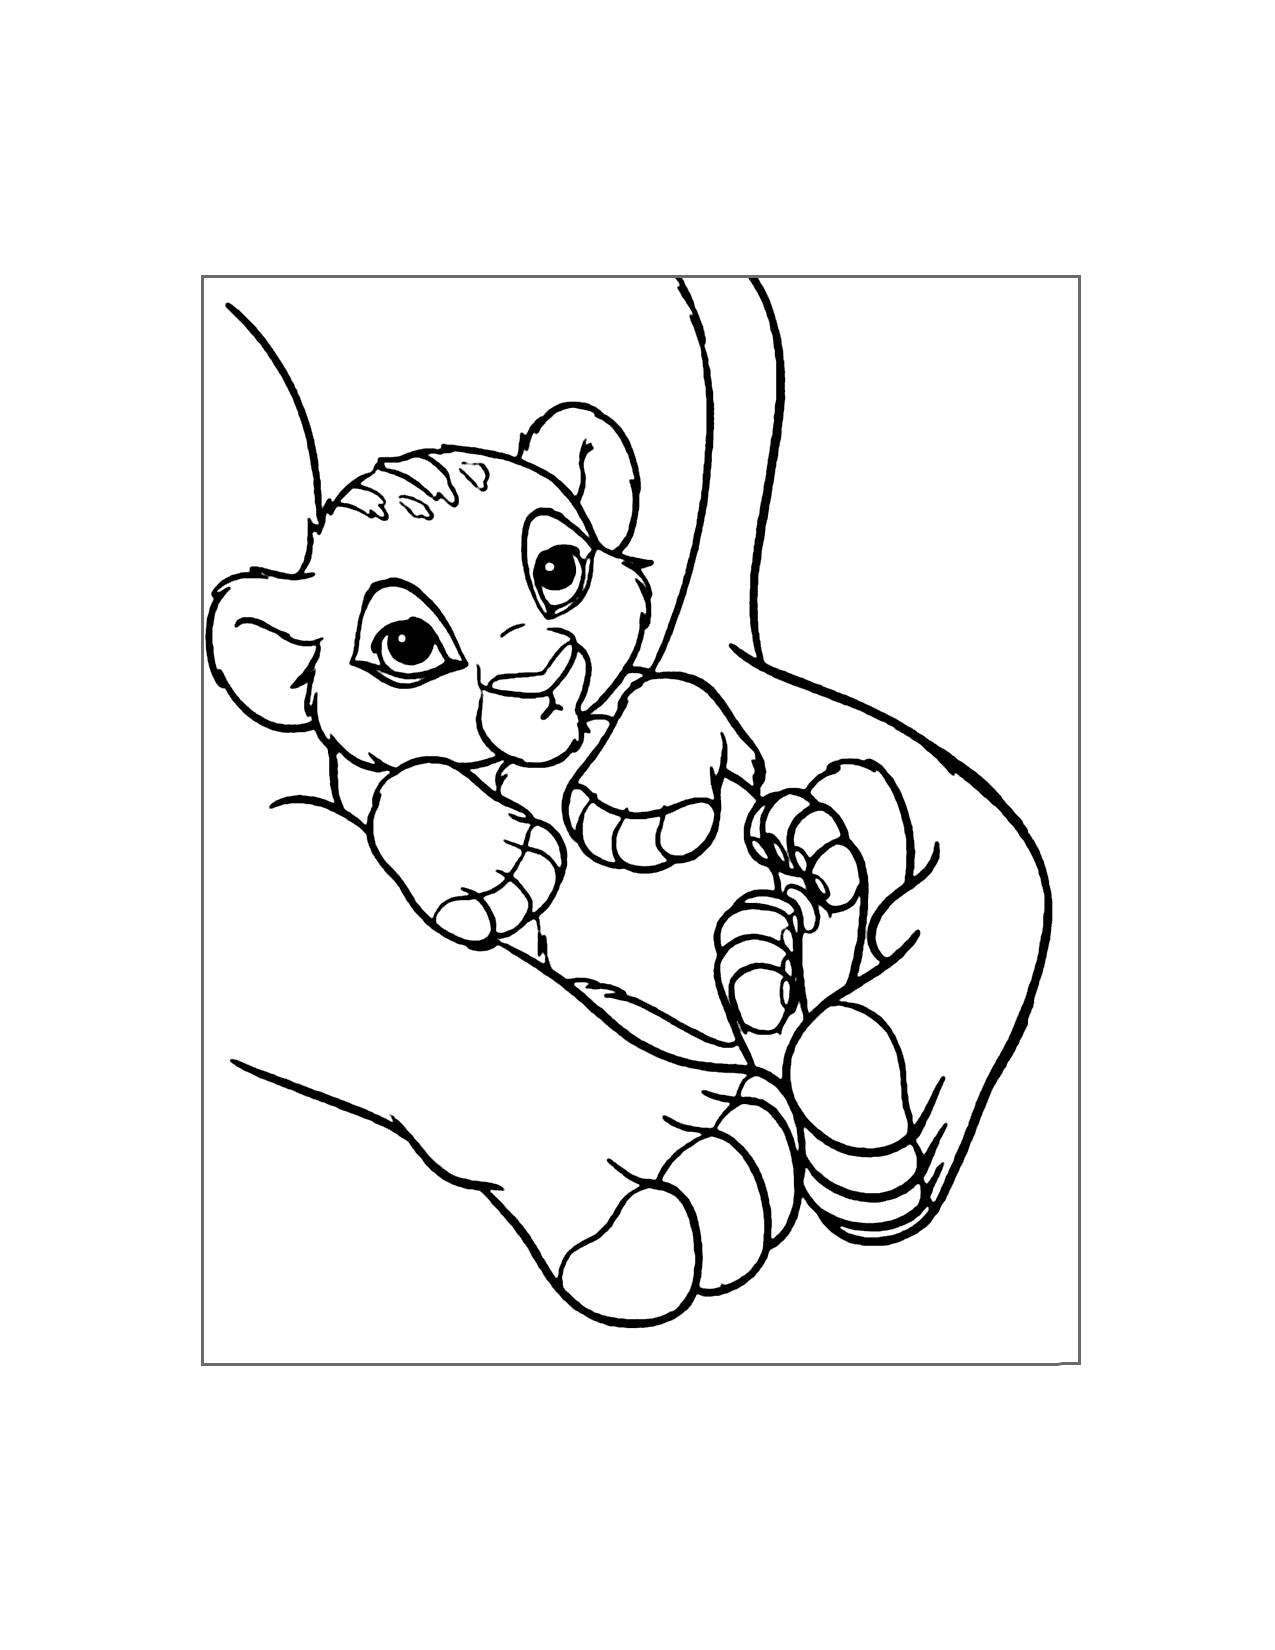 Baby Simba Lion King Coloring Page